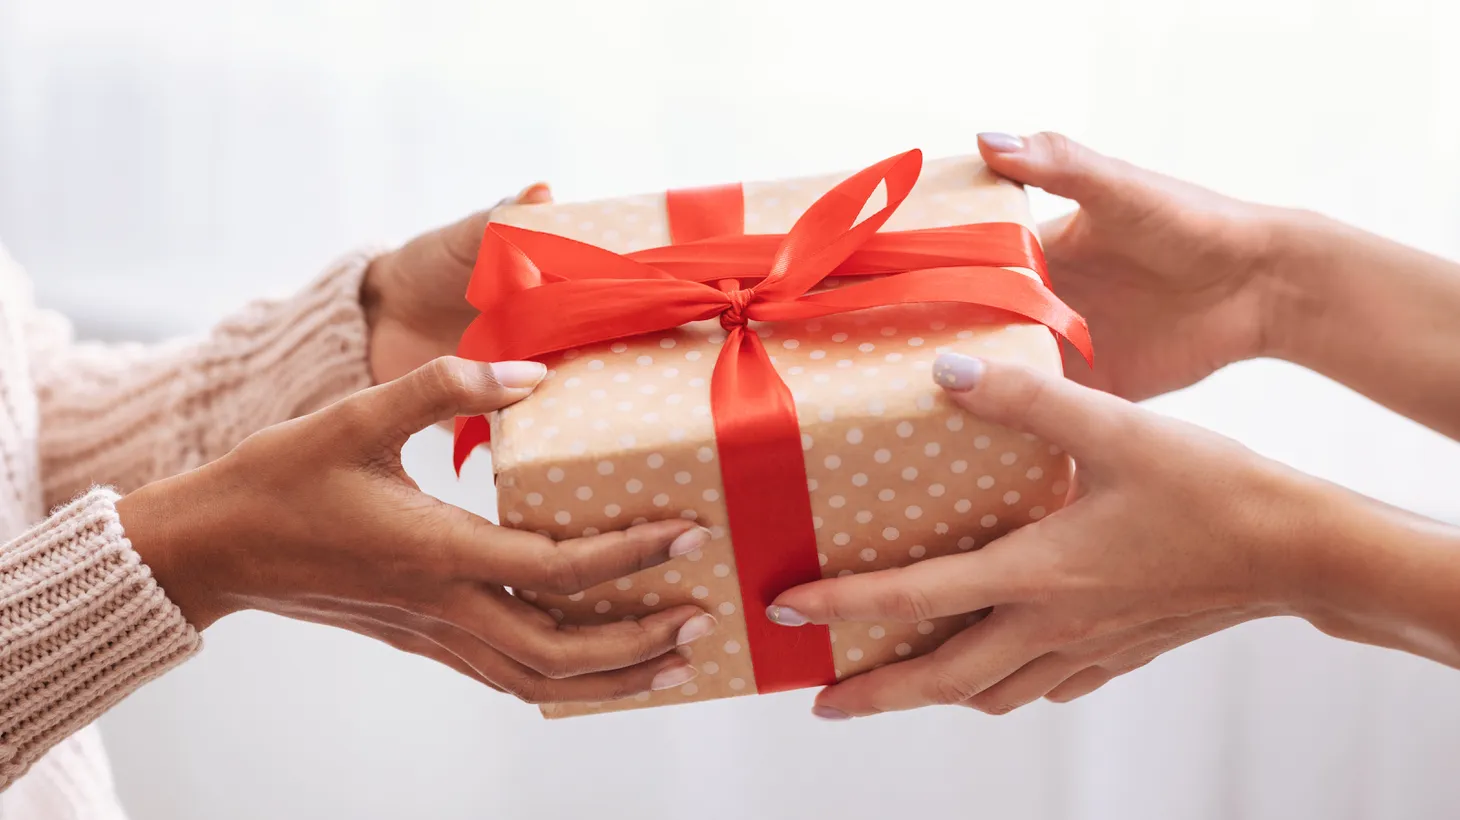 Have you received a heartfelt gift during the holidays – maybe a letter, reunion, or handcrafted item — that touched your soul?